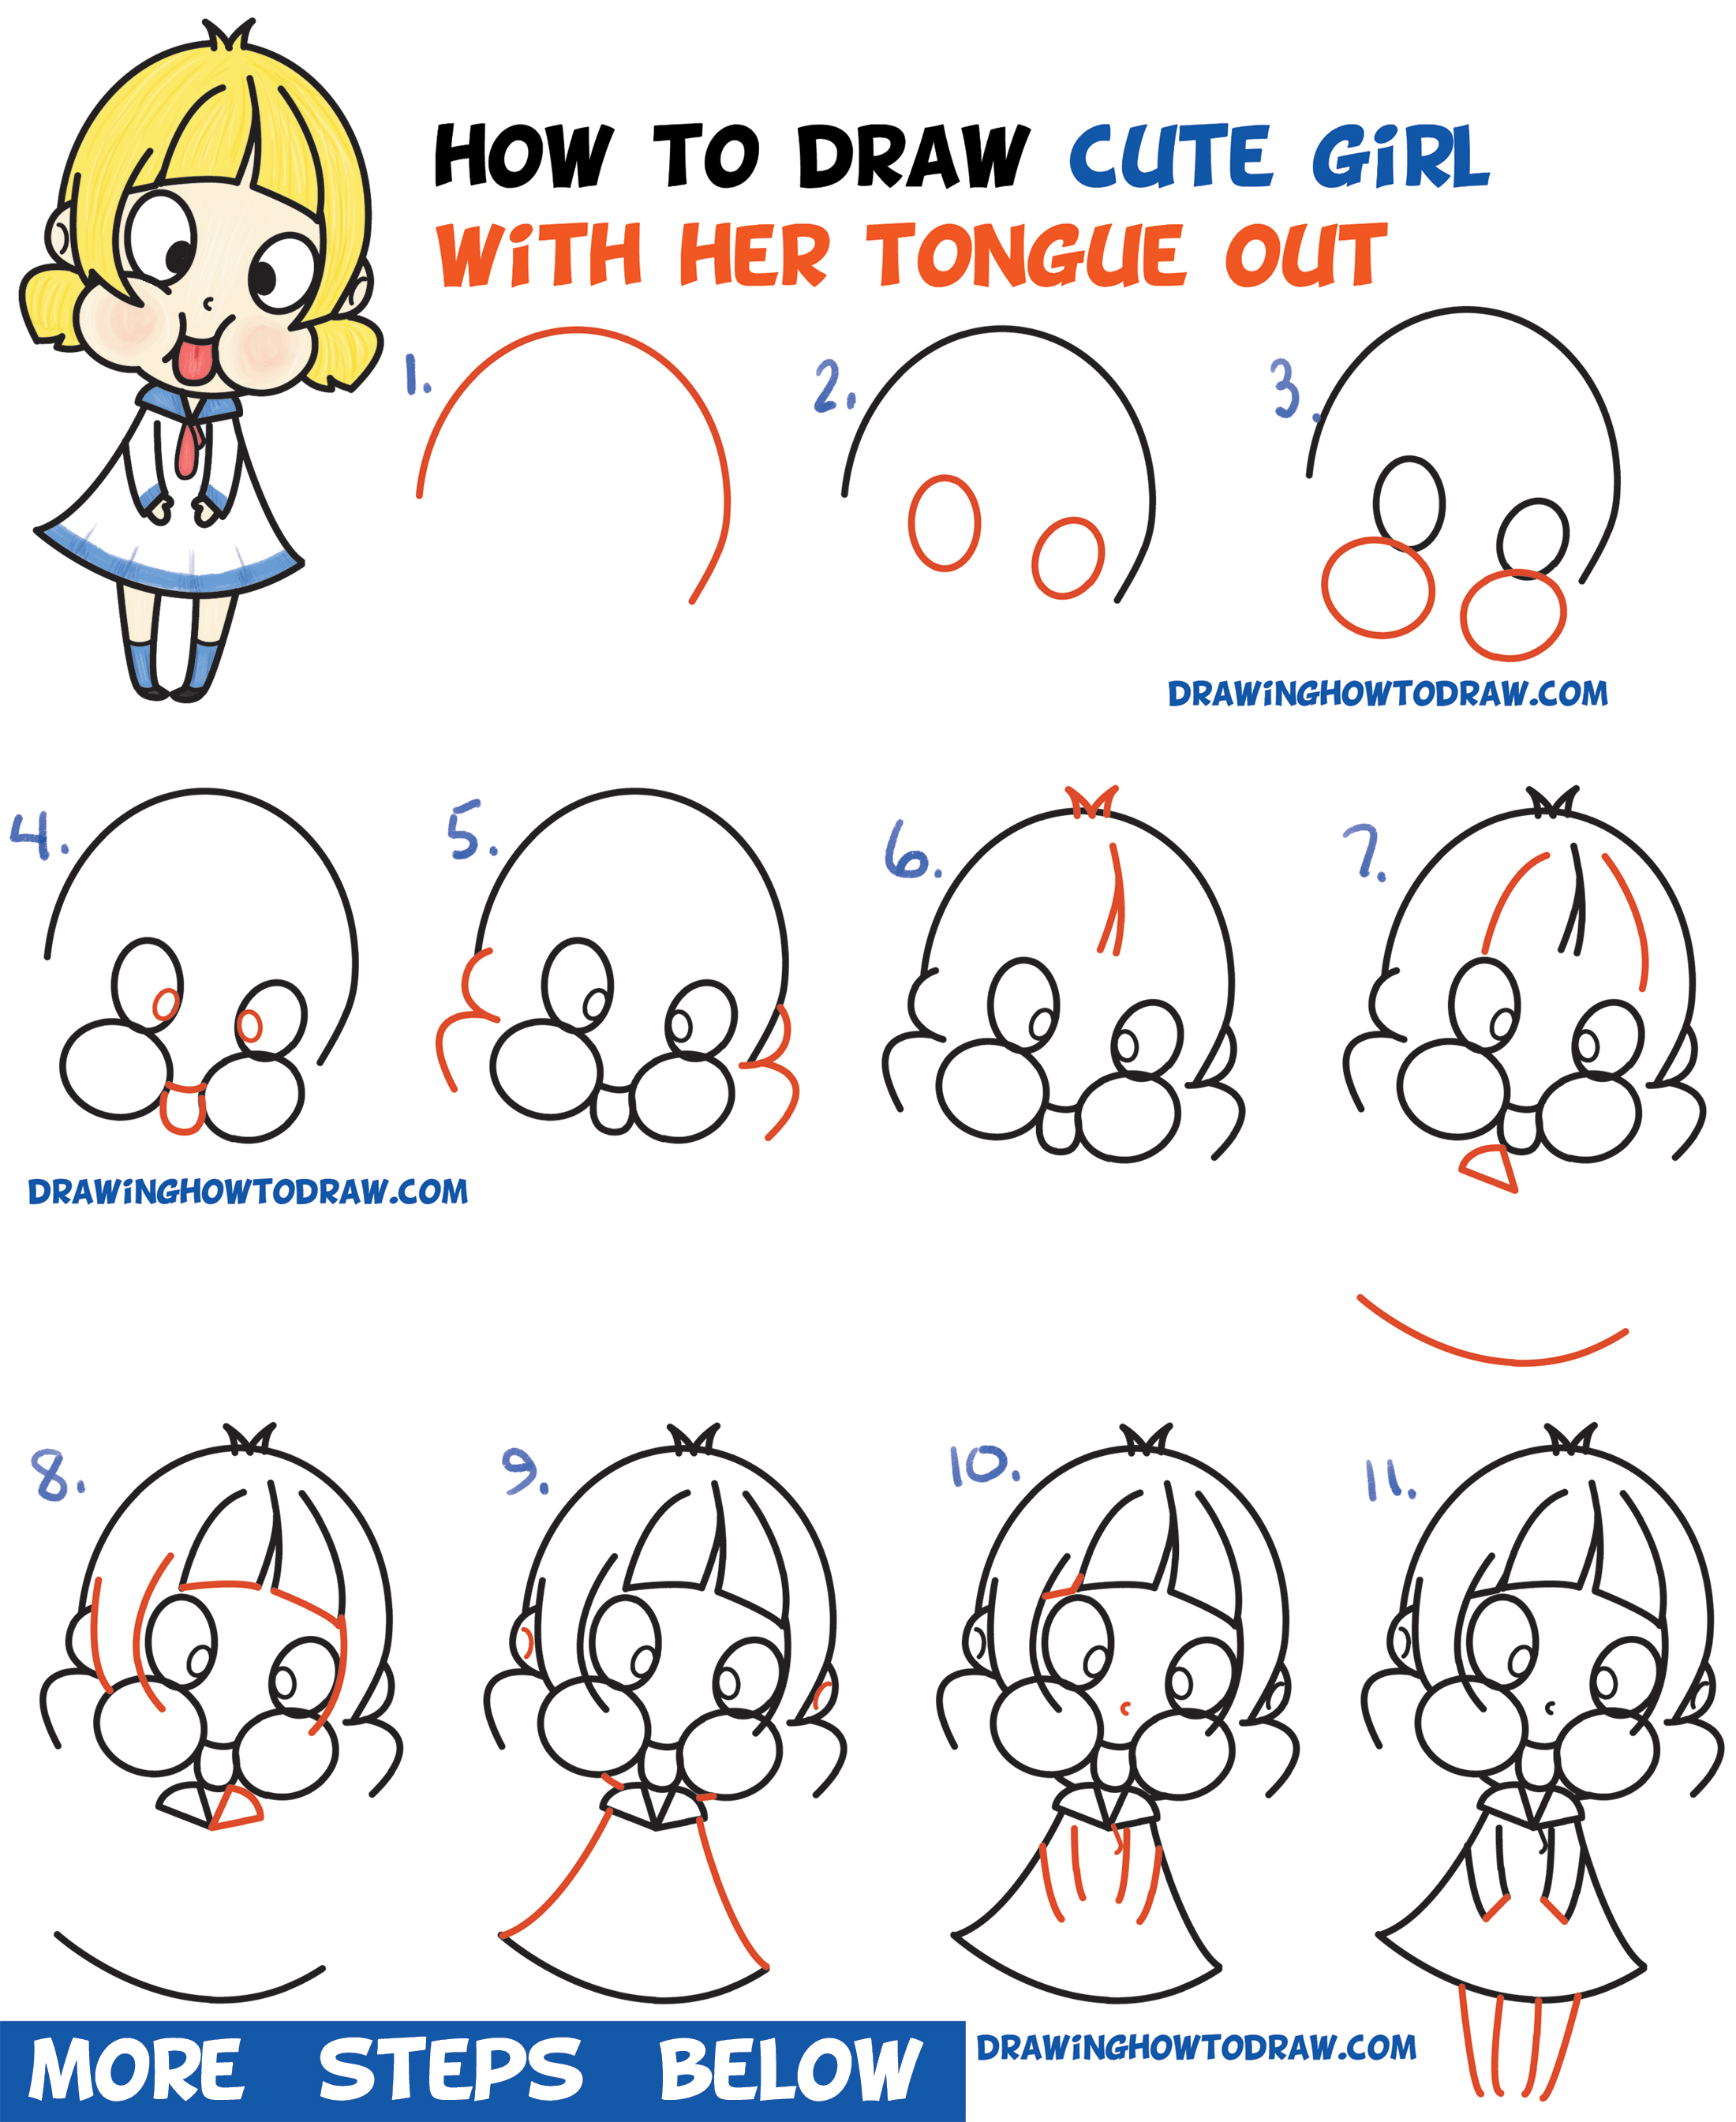 How to Draw a Cute Cartoon Girl (Chibi) Sticking Her Tongue Out Easy Step by Step Drawing Tutorial for Kids